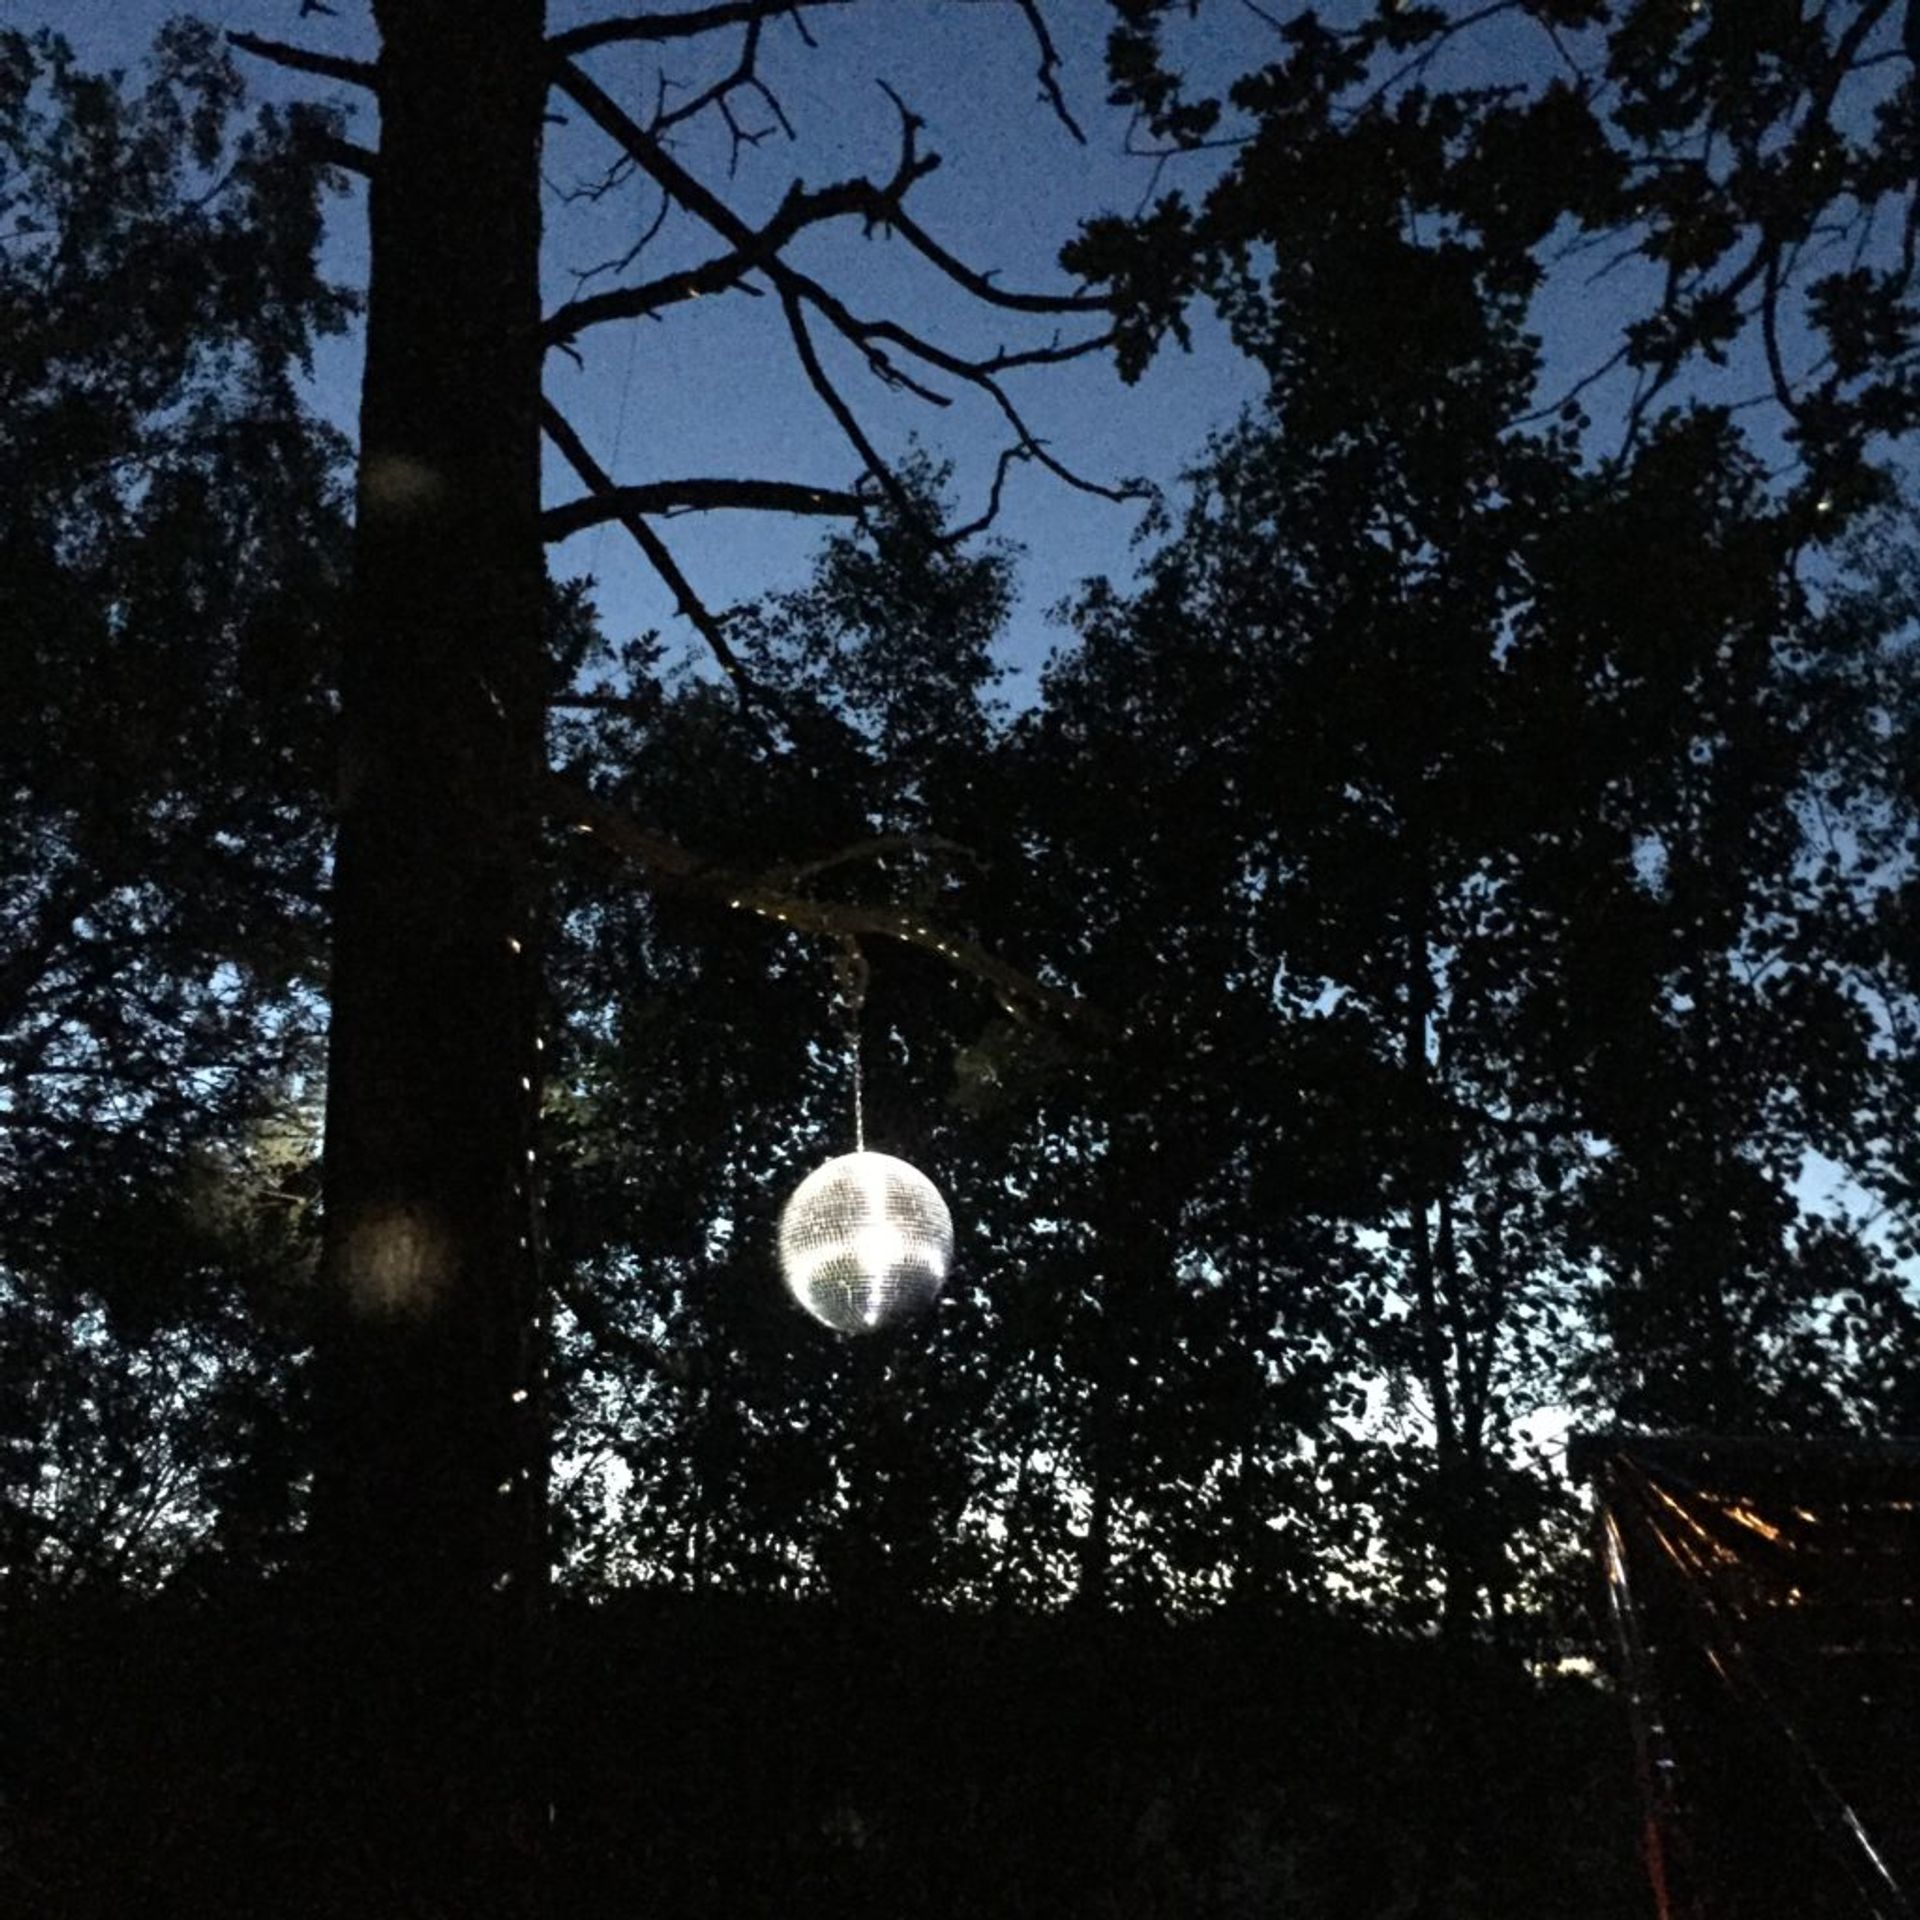 A rave in the woods, 1:30 am in the summer. It is dark and you can see tree tops from underneath and a disco ball. hanging down.